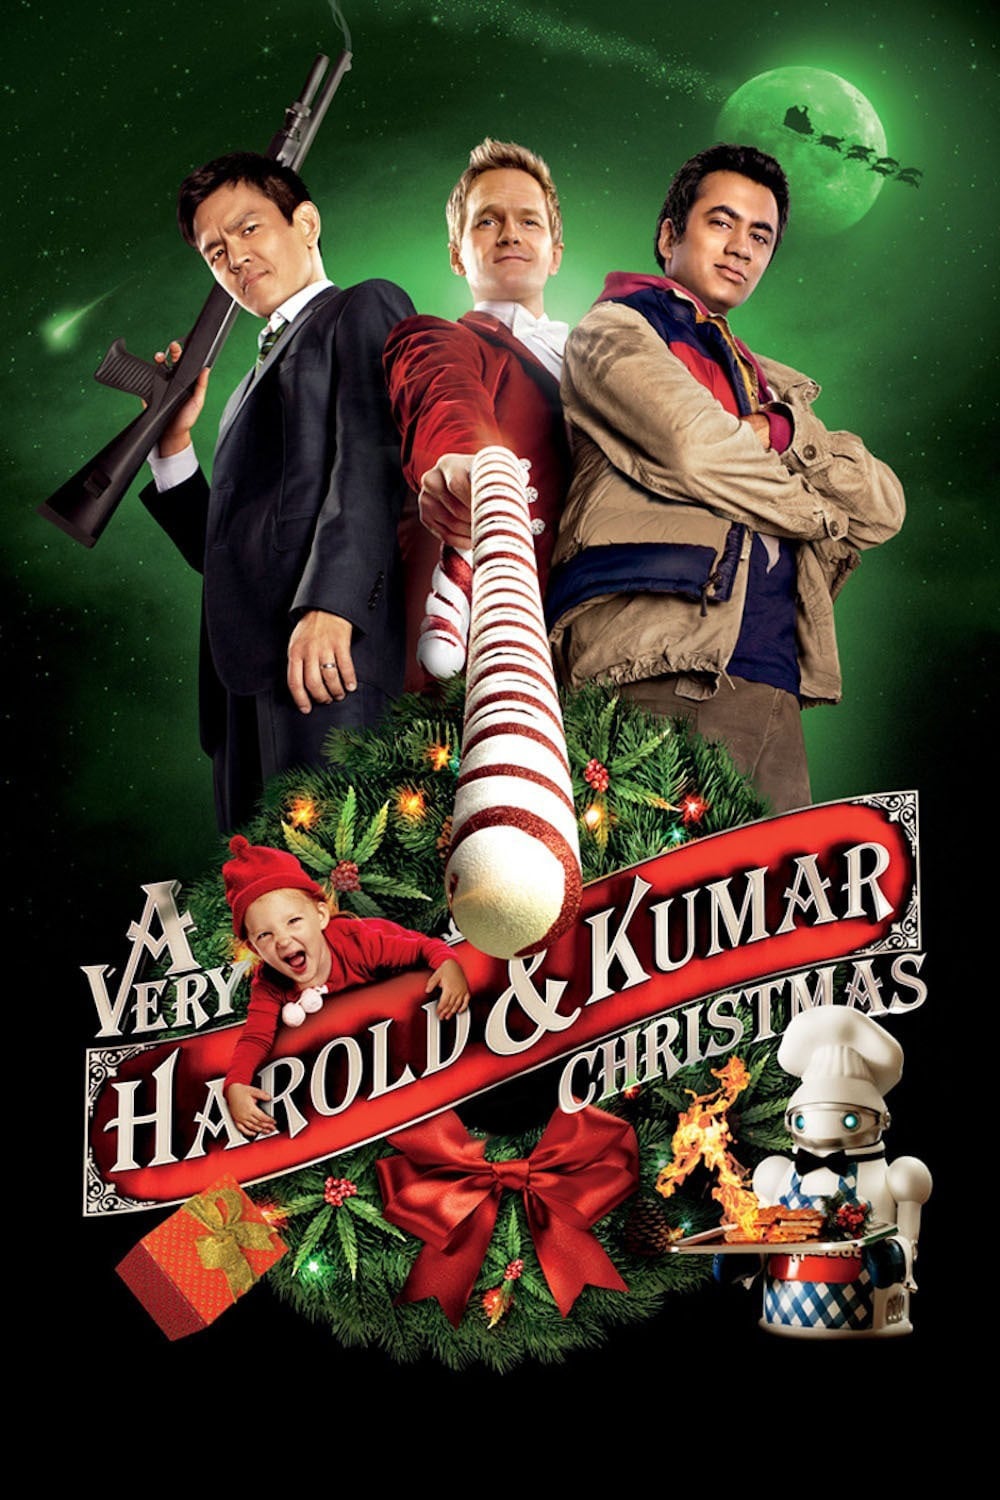 Poster for the movie "A Very Harold & Kumar Christmas"